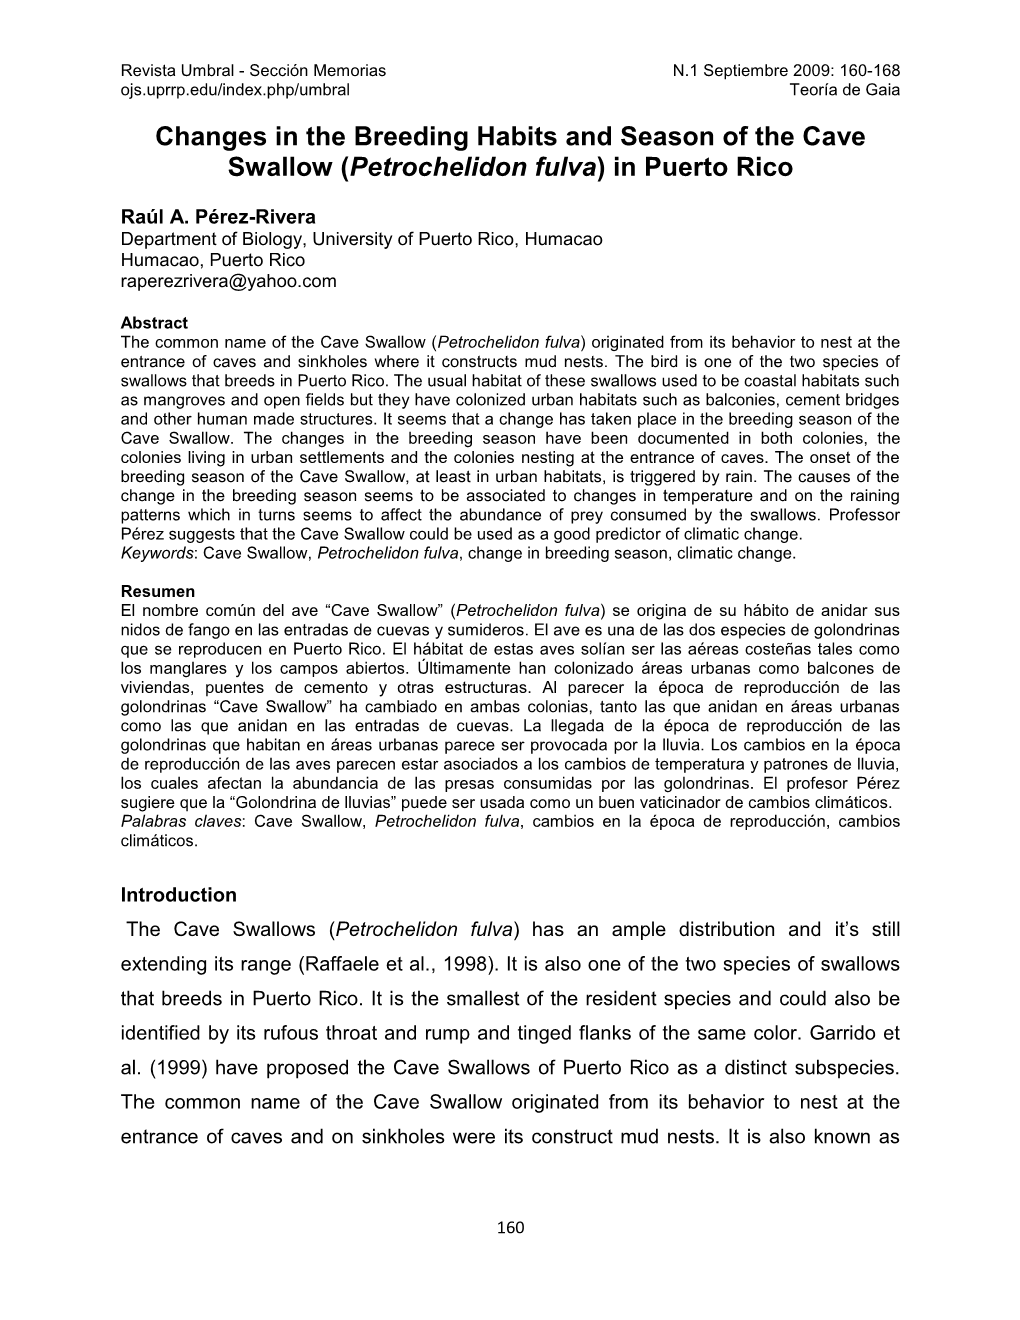 Changes in the Breeding Habits and Season of the Cave Swallow (Petrochelidon Fulva) in Puerto Rico